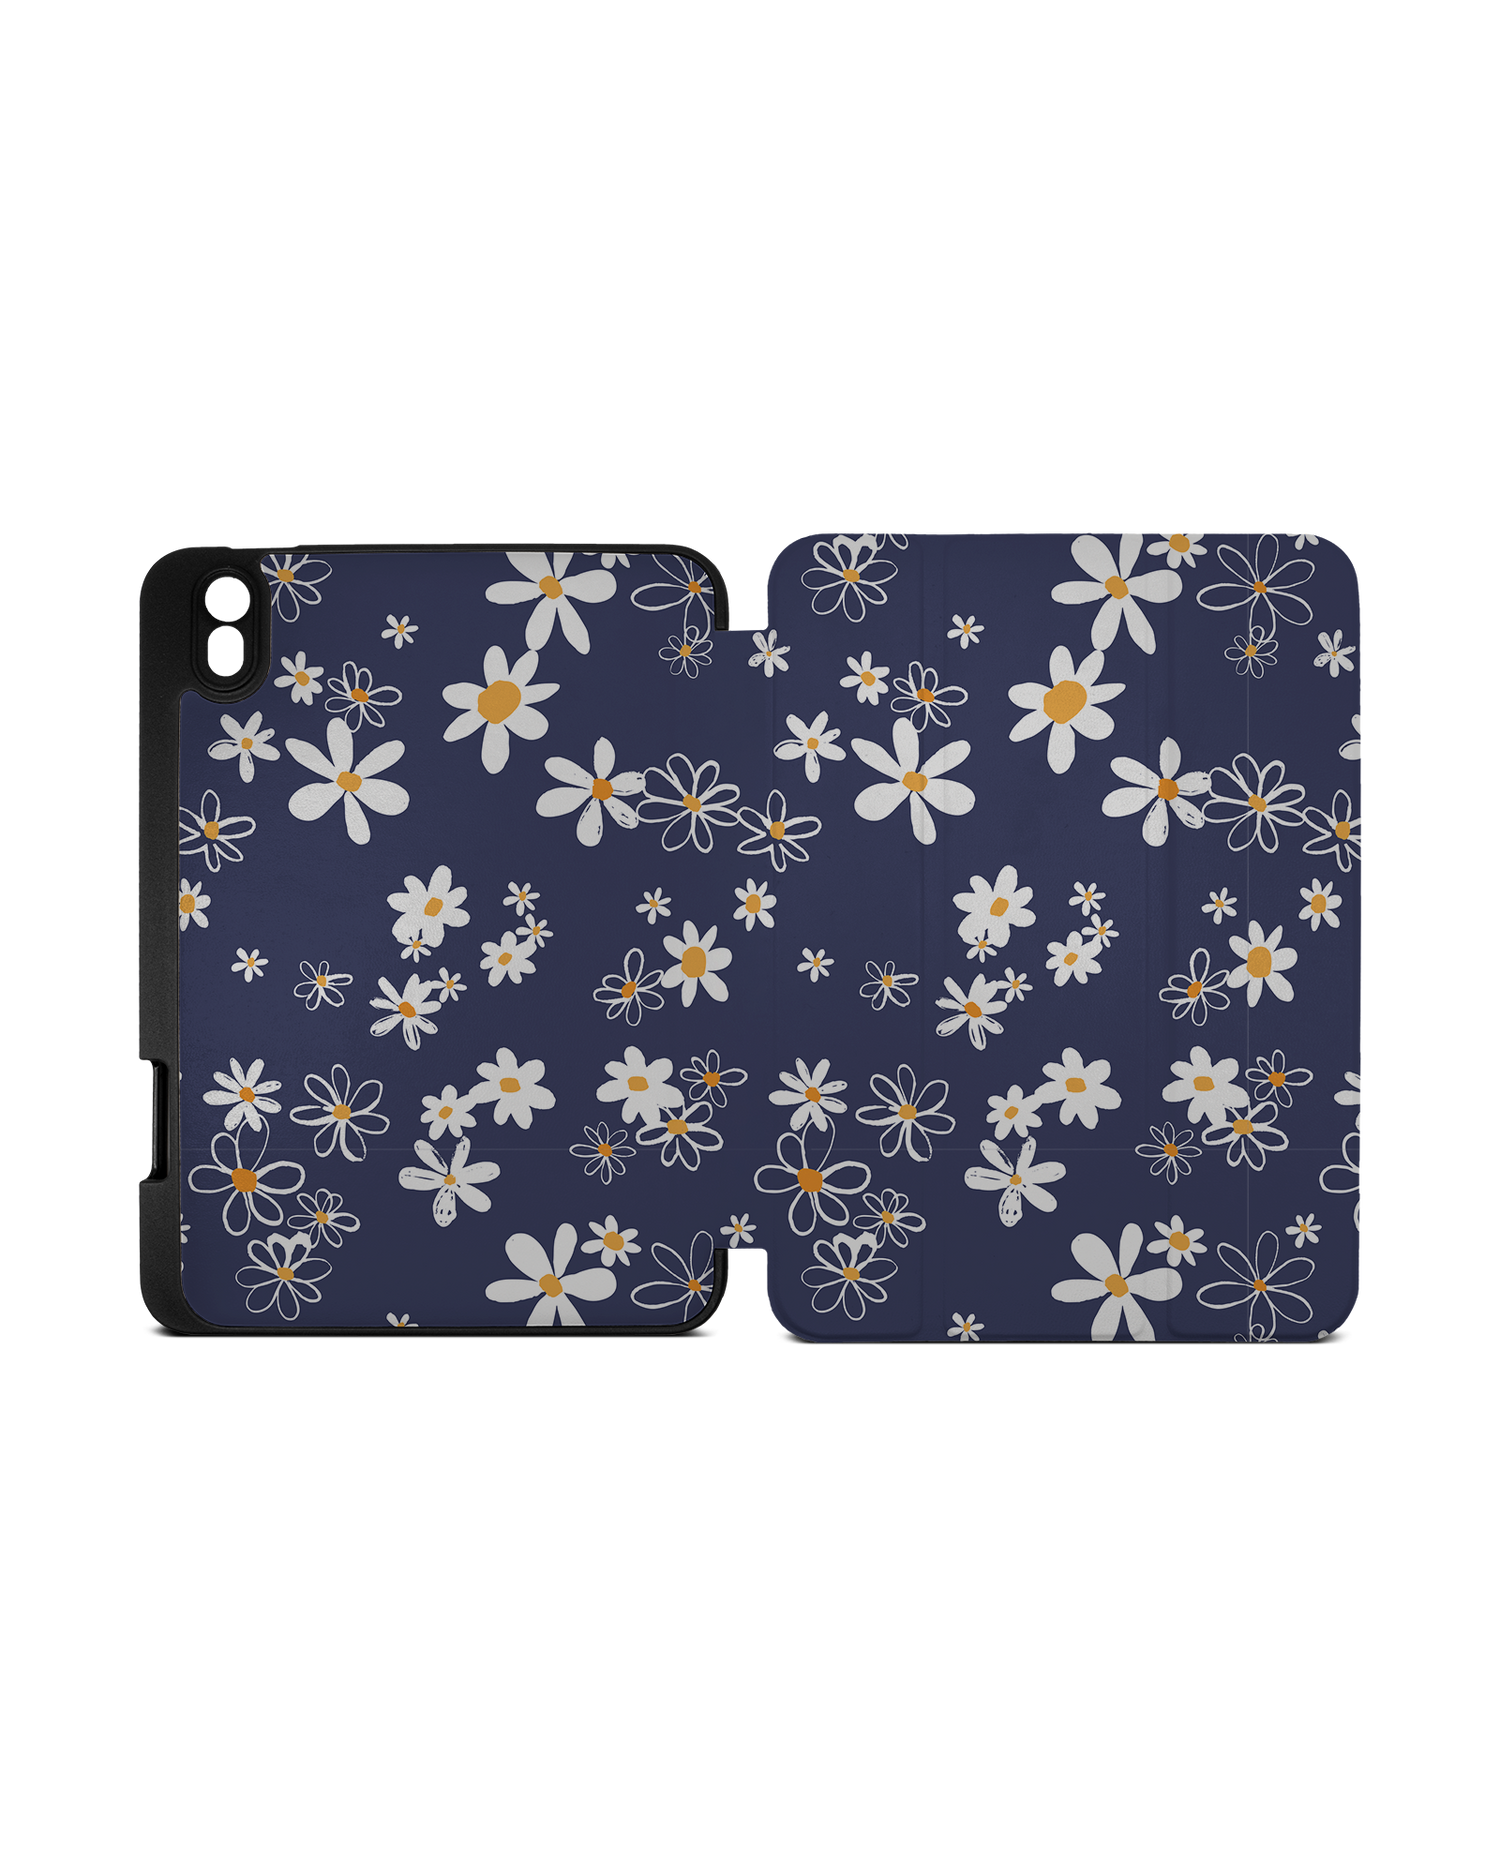 Navy Daisies iPad Case with Pencil Holder Apple iPad mini 6 (2021): Opened exterior view